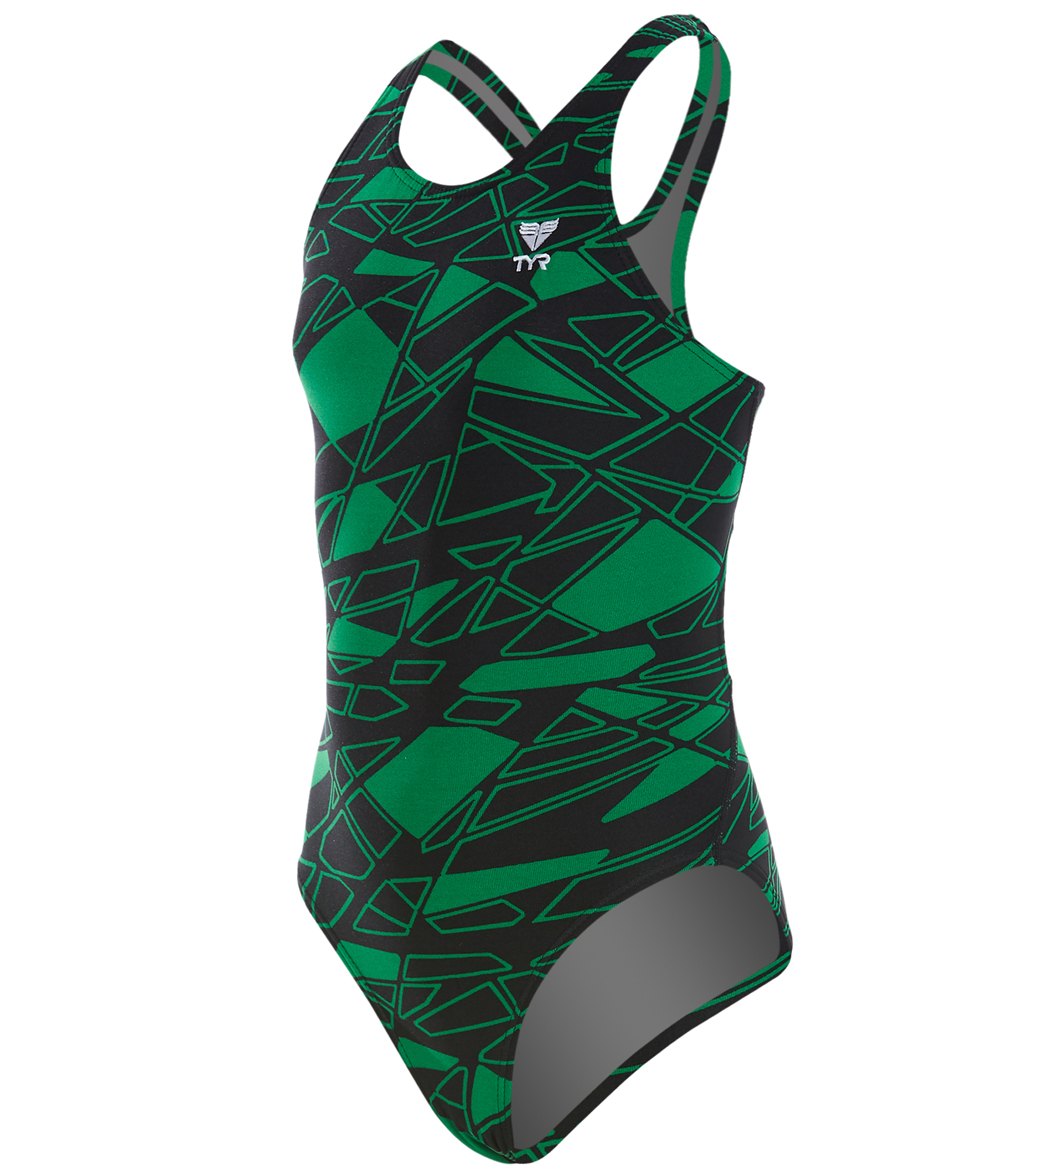 TYR Girls' Mantova Maxfit One Piece Swimsuit - Green 22 Polyester - Swimoutlet.com